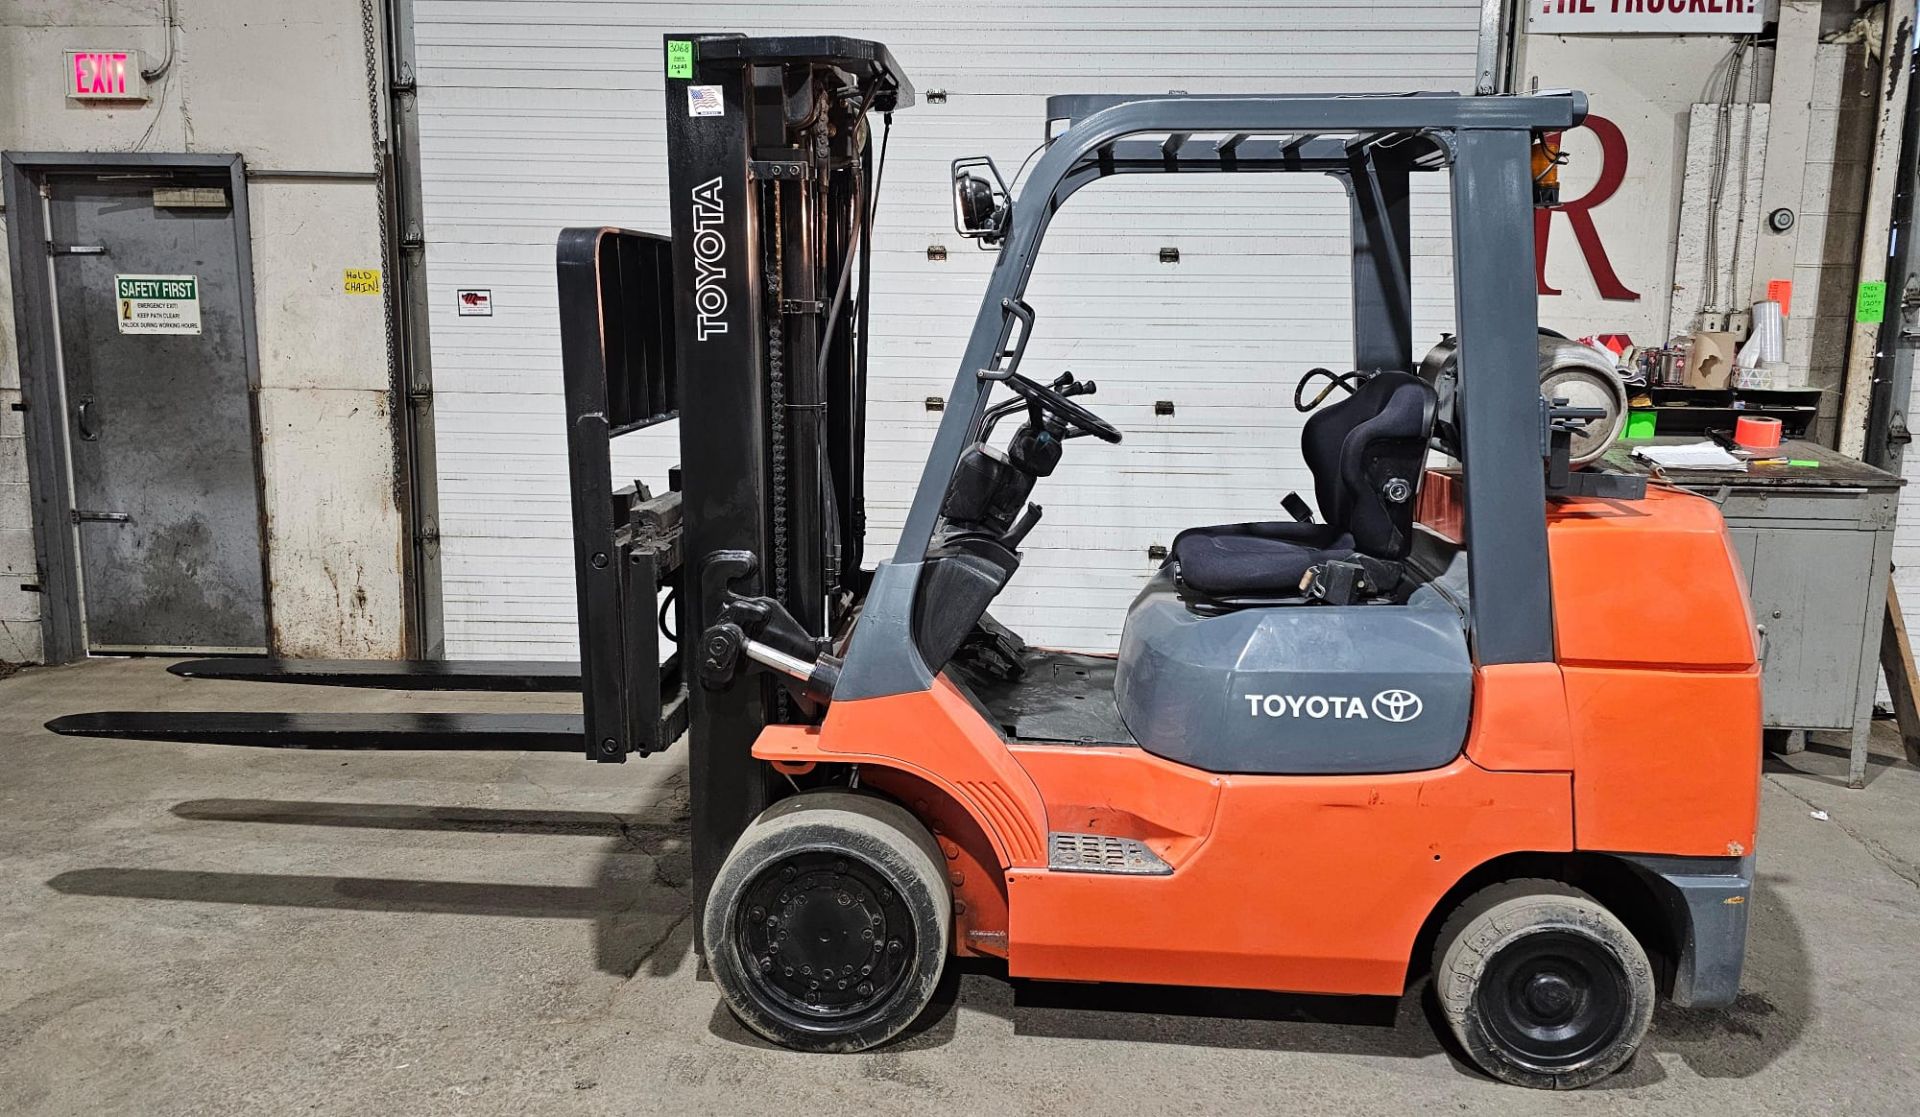 Toyota 7,000lbs Capacity LPG (Propane) Forklift with sideshift 60" Forks & 3-STAGE MAST 187"